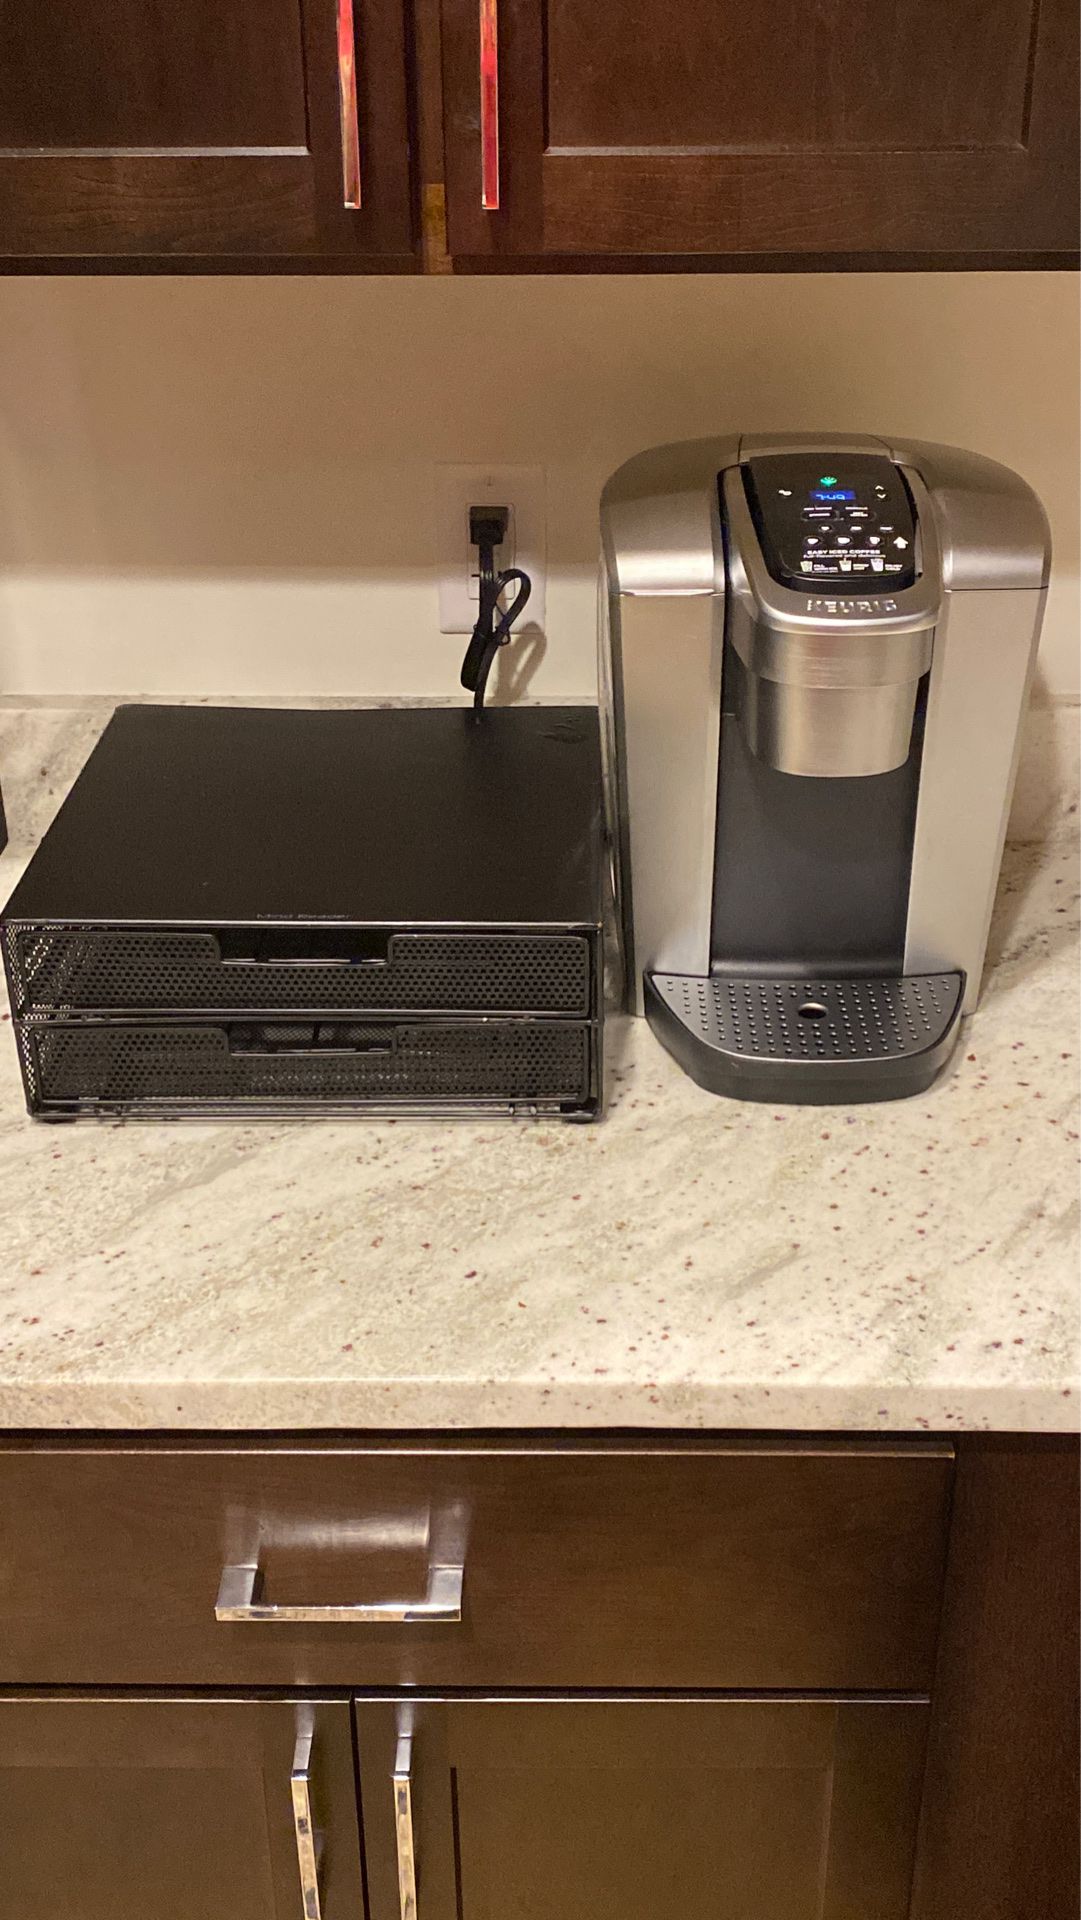 High-End Keurig - brand new! And double decker pod shelves included!!